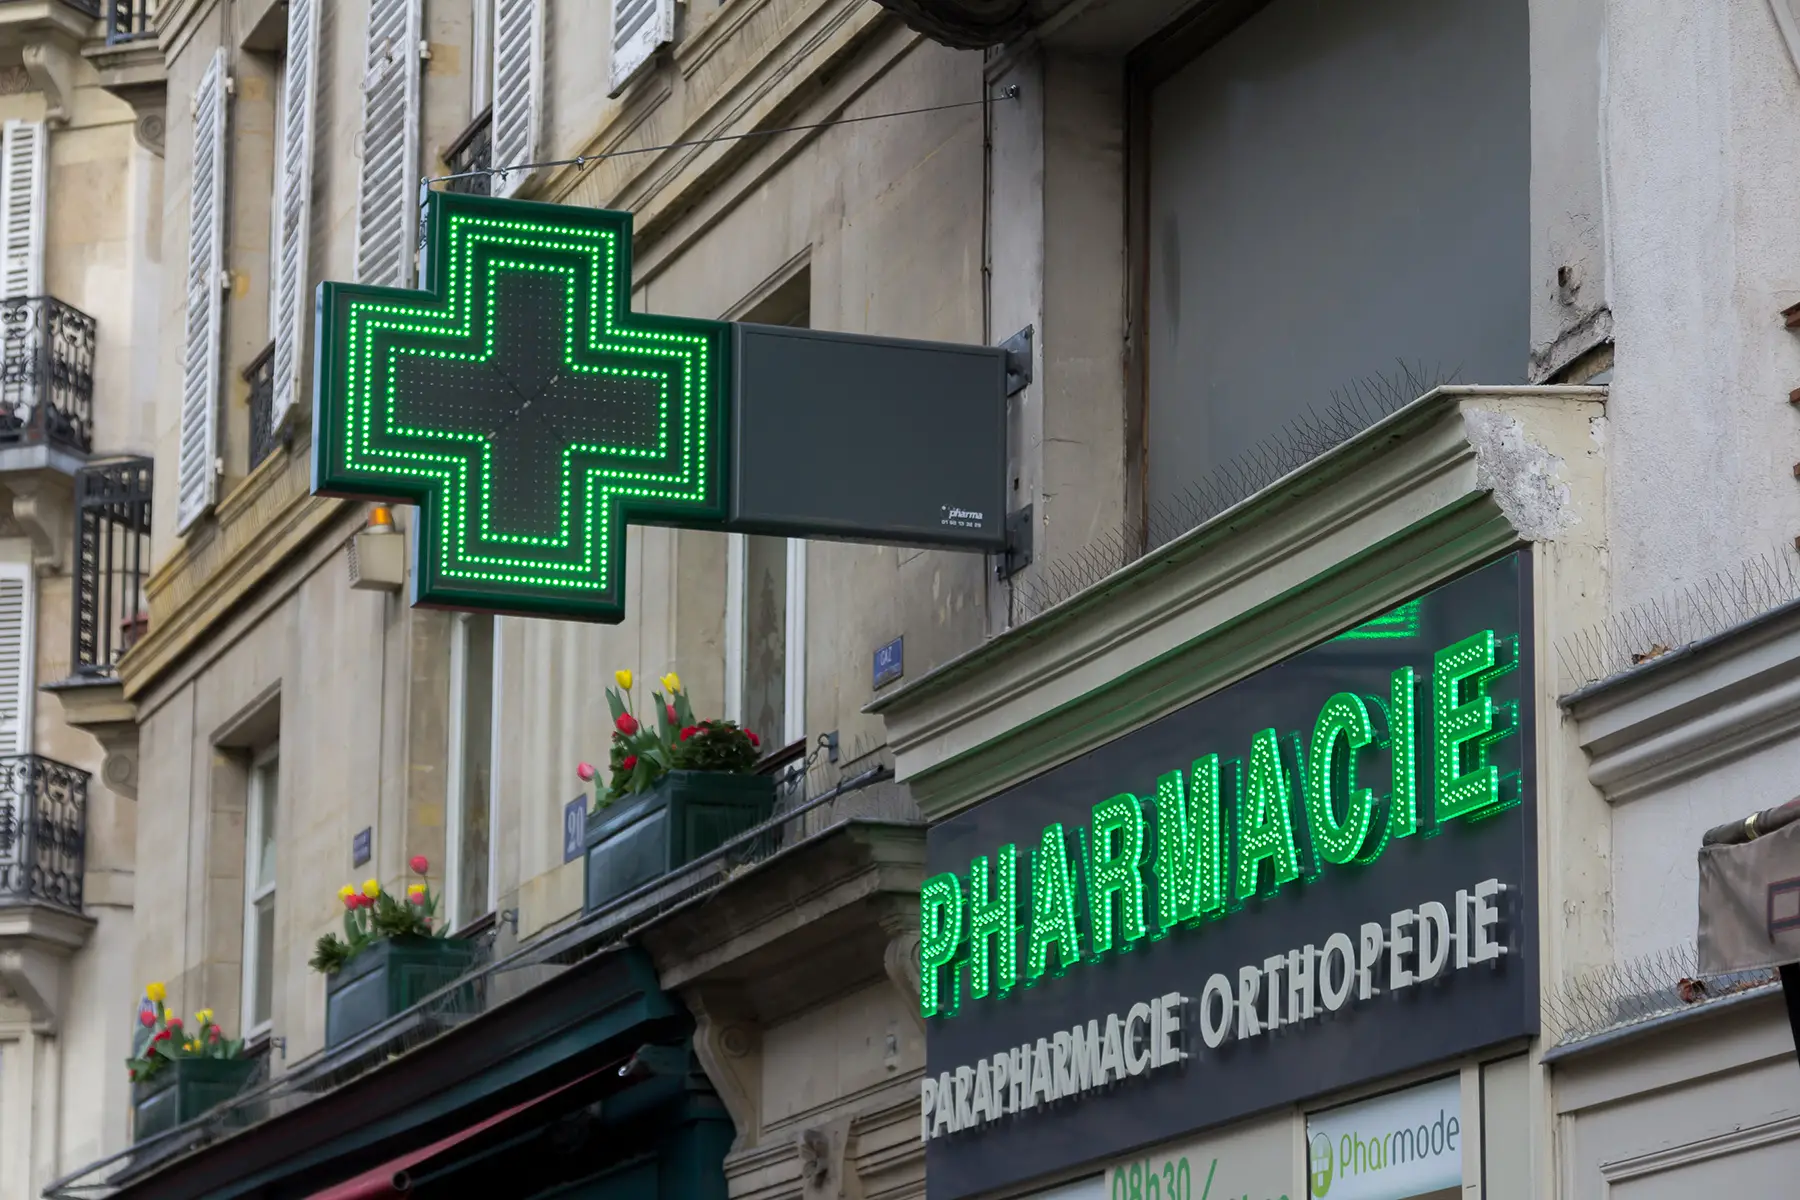 A pharmacy in Paris, France with a neon green sign above it